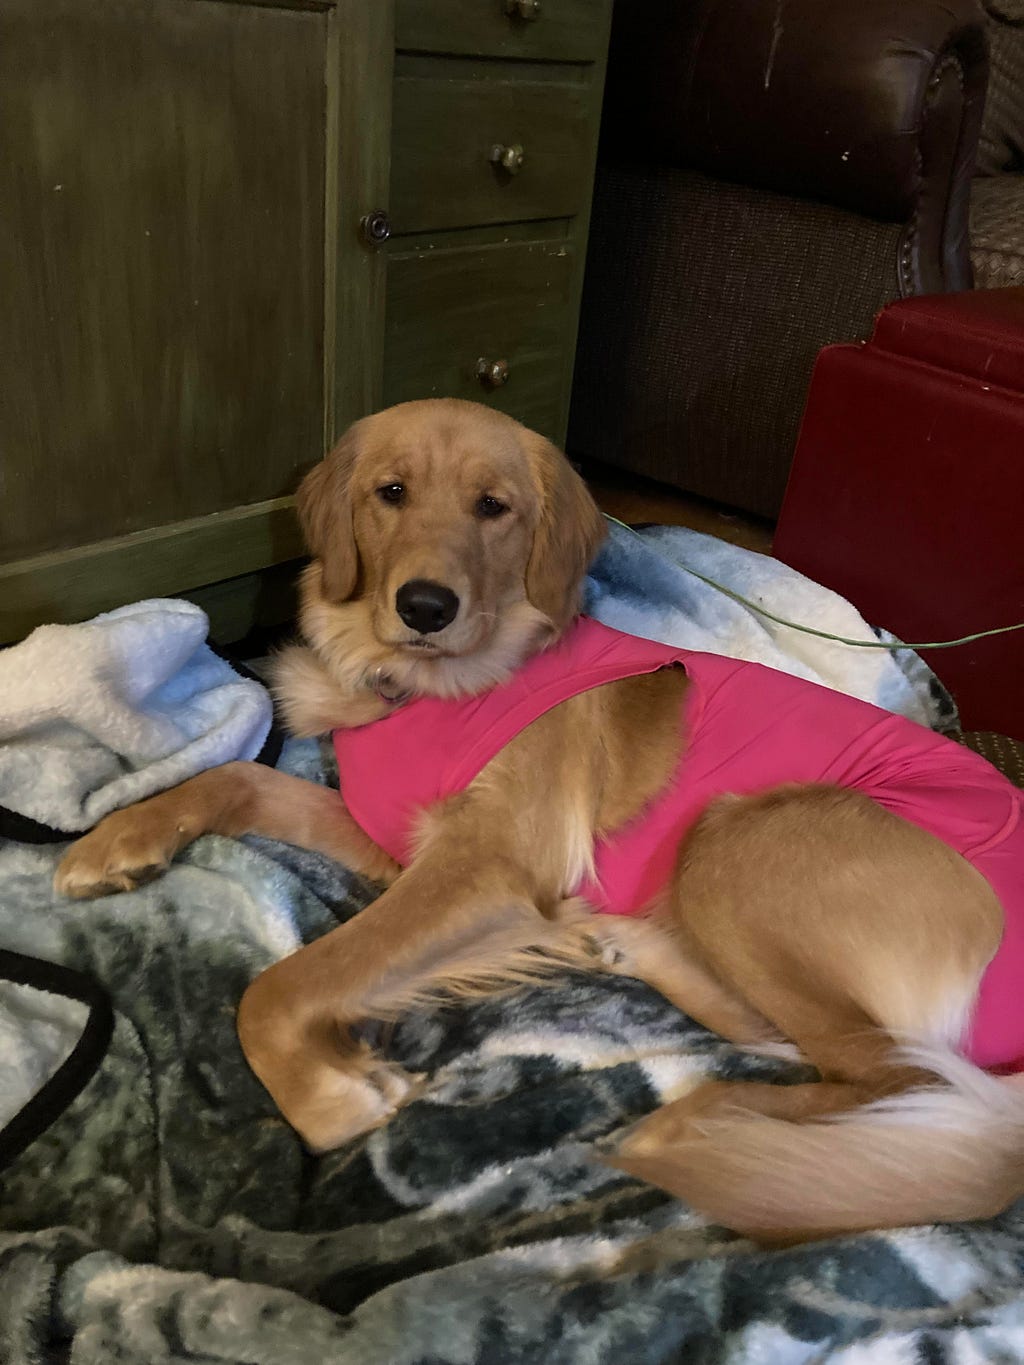 Female golden retriever resting on a dog bed wearing a pink surgical suit.